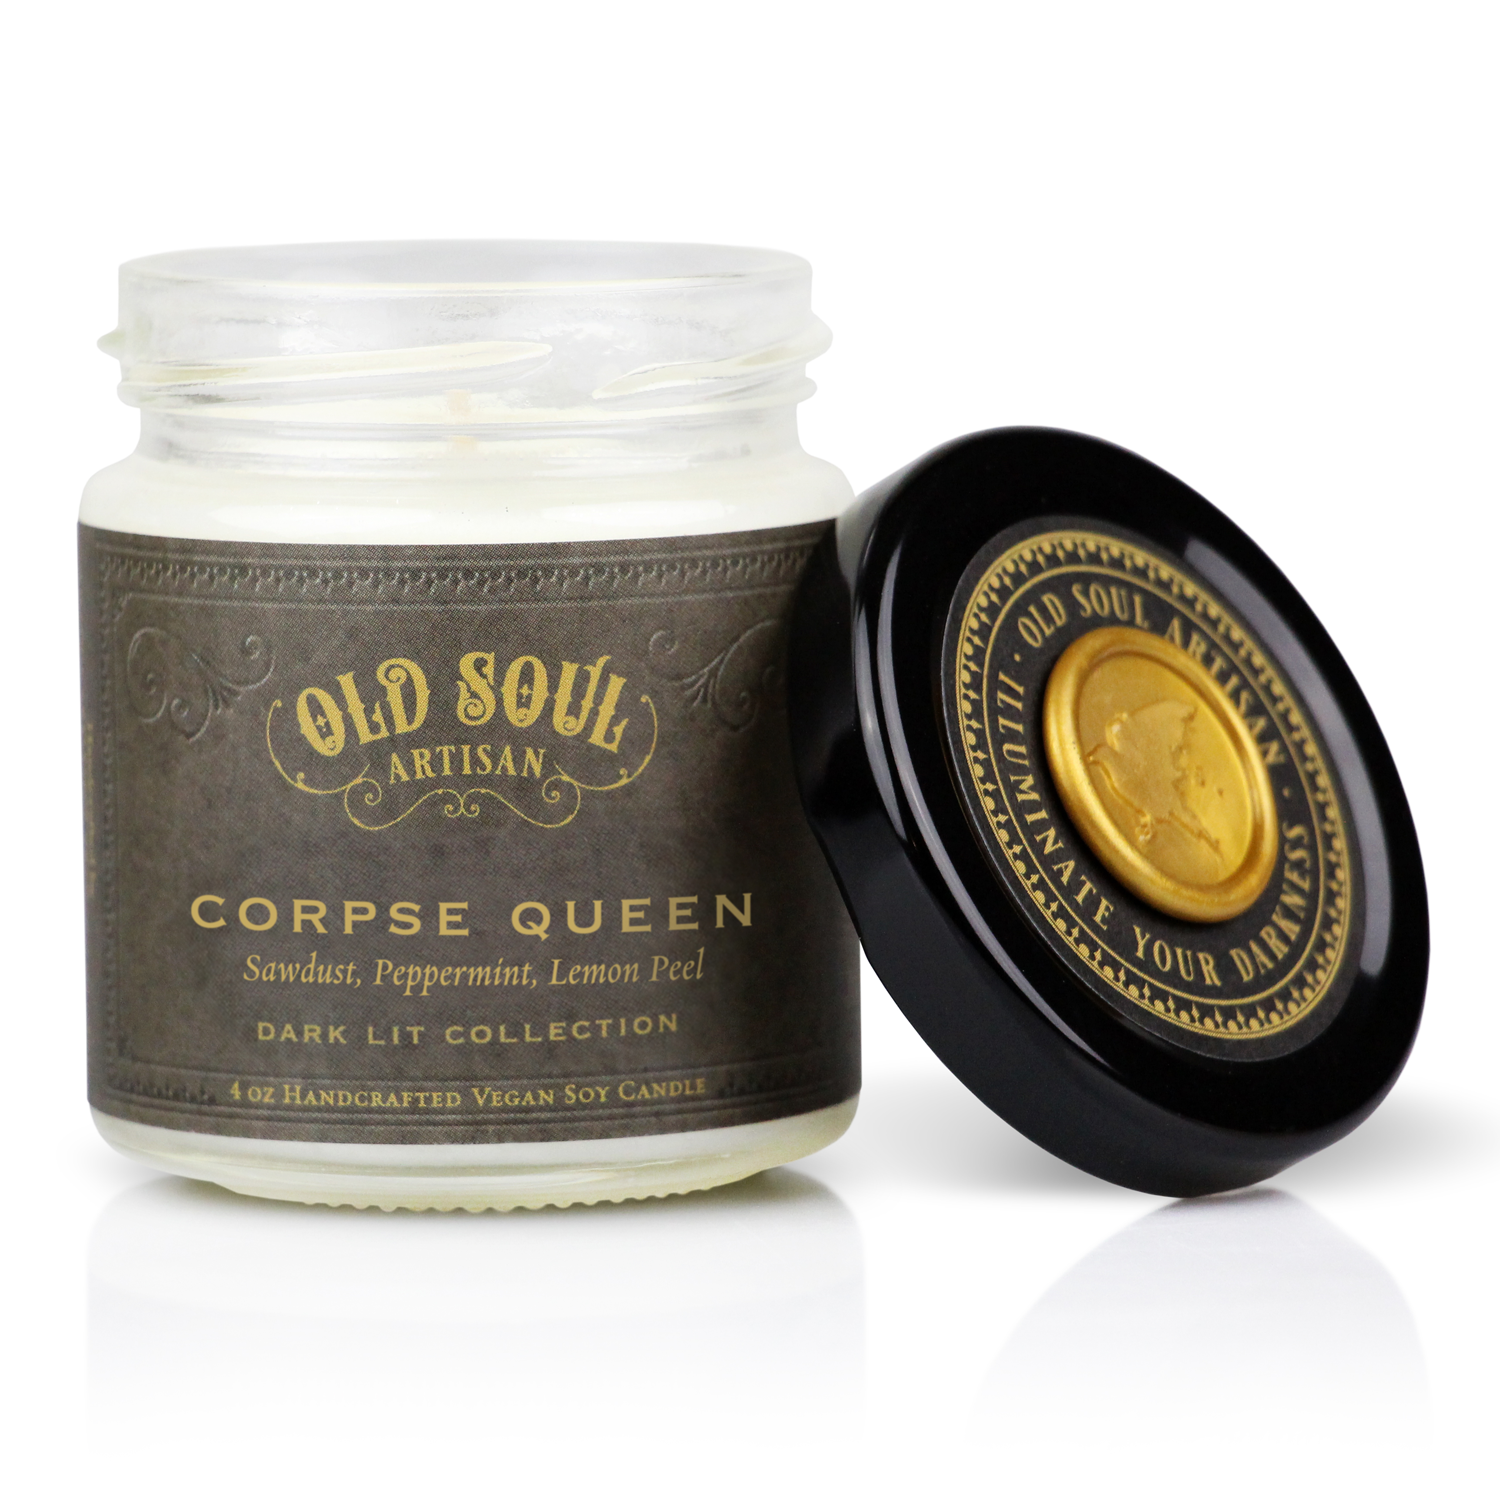 Corpse Queen Soy Candle (sawdust, peppermint, lemon peel)